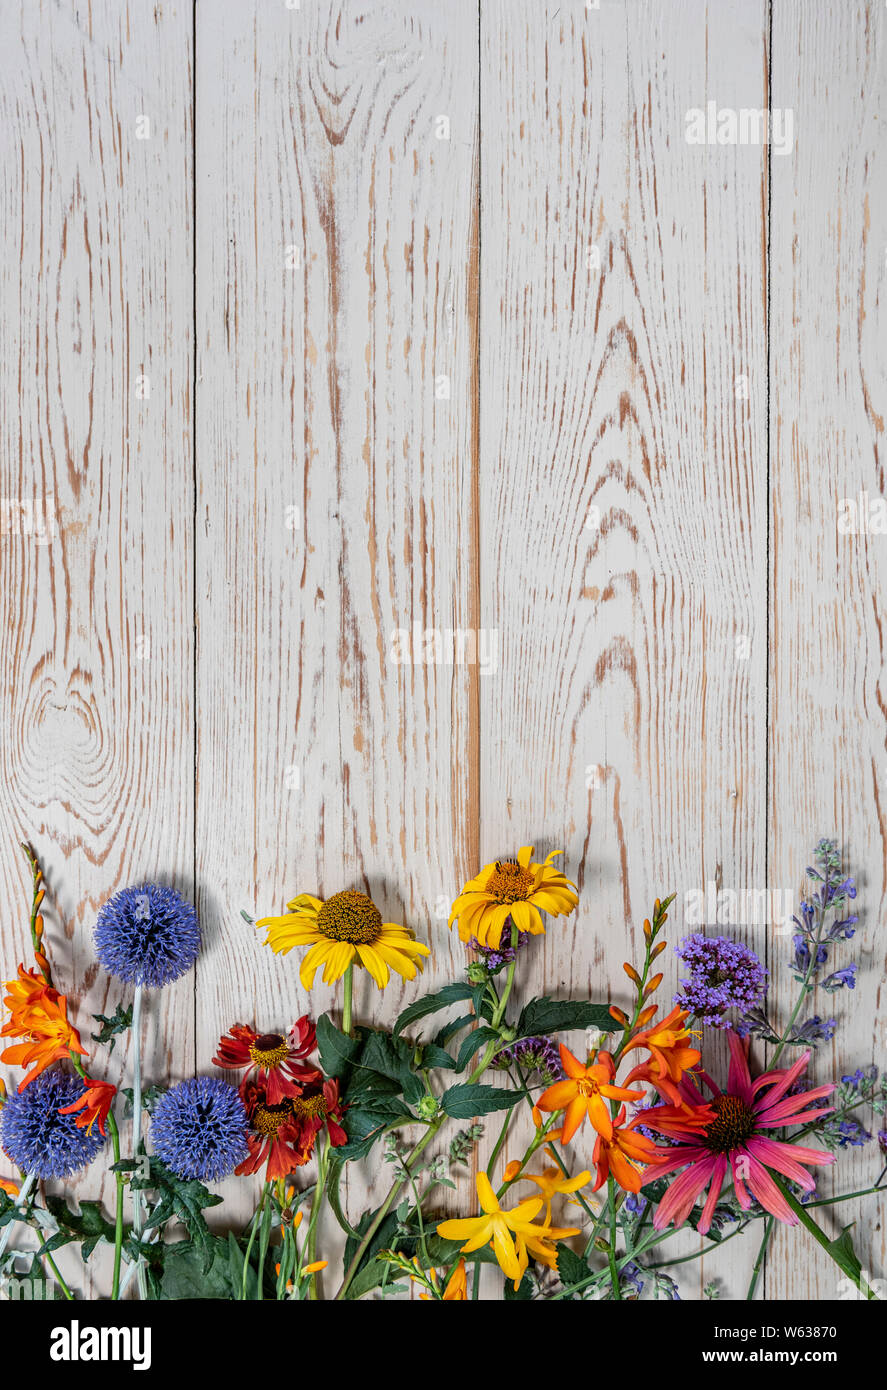 Summer flowers laid on a wooden table, with copy space. Stock Photo